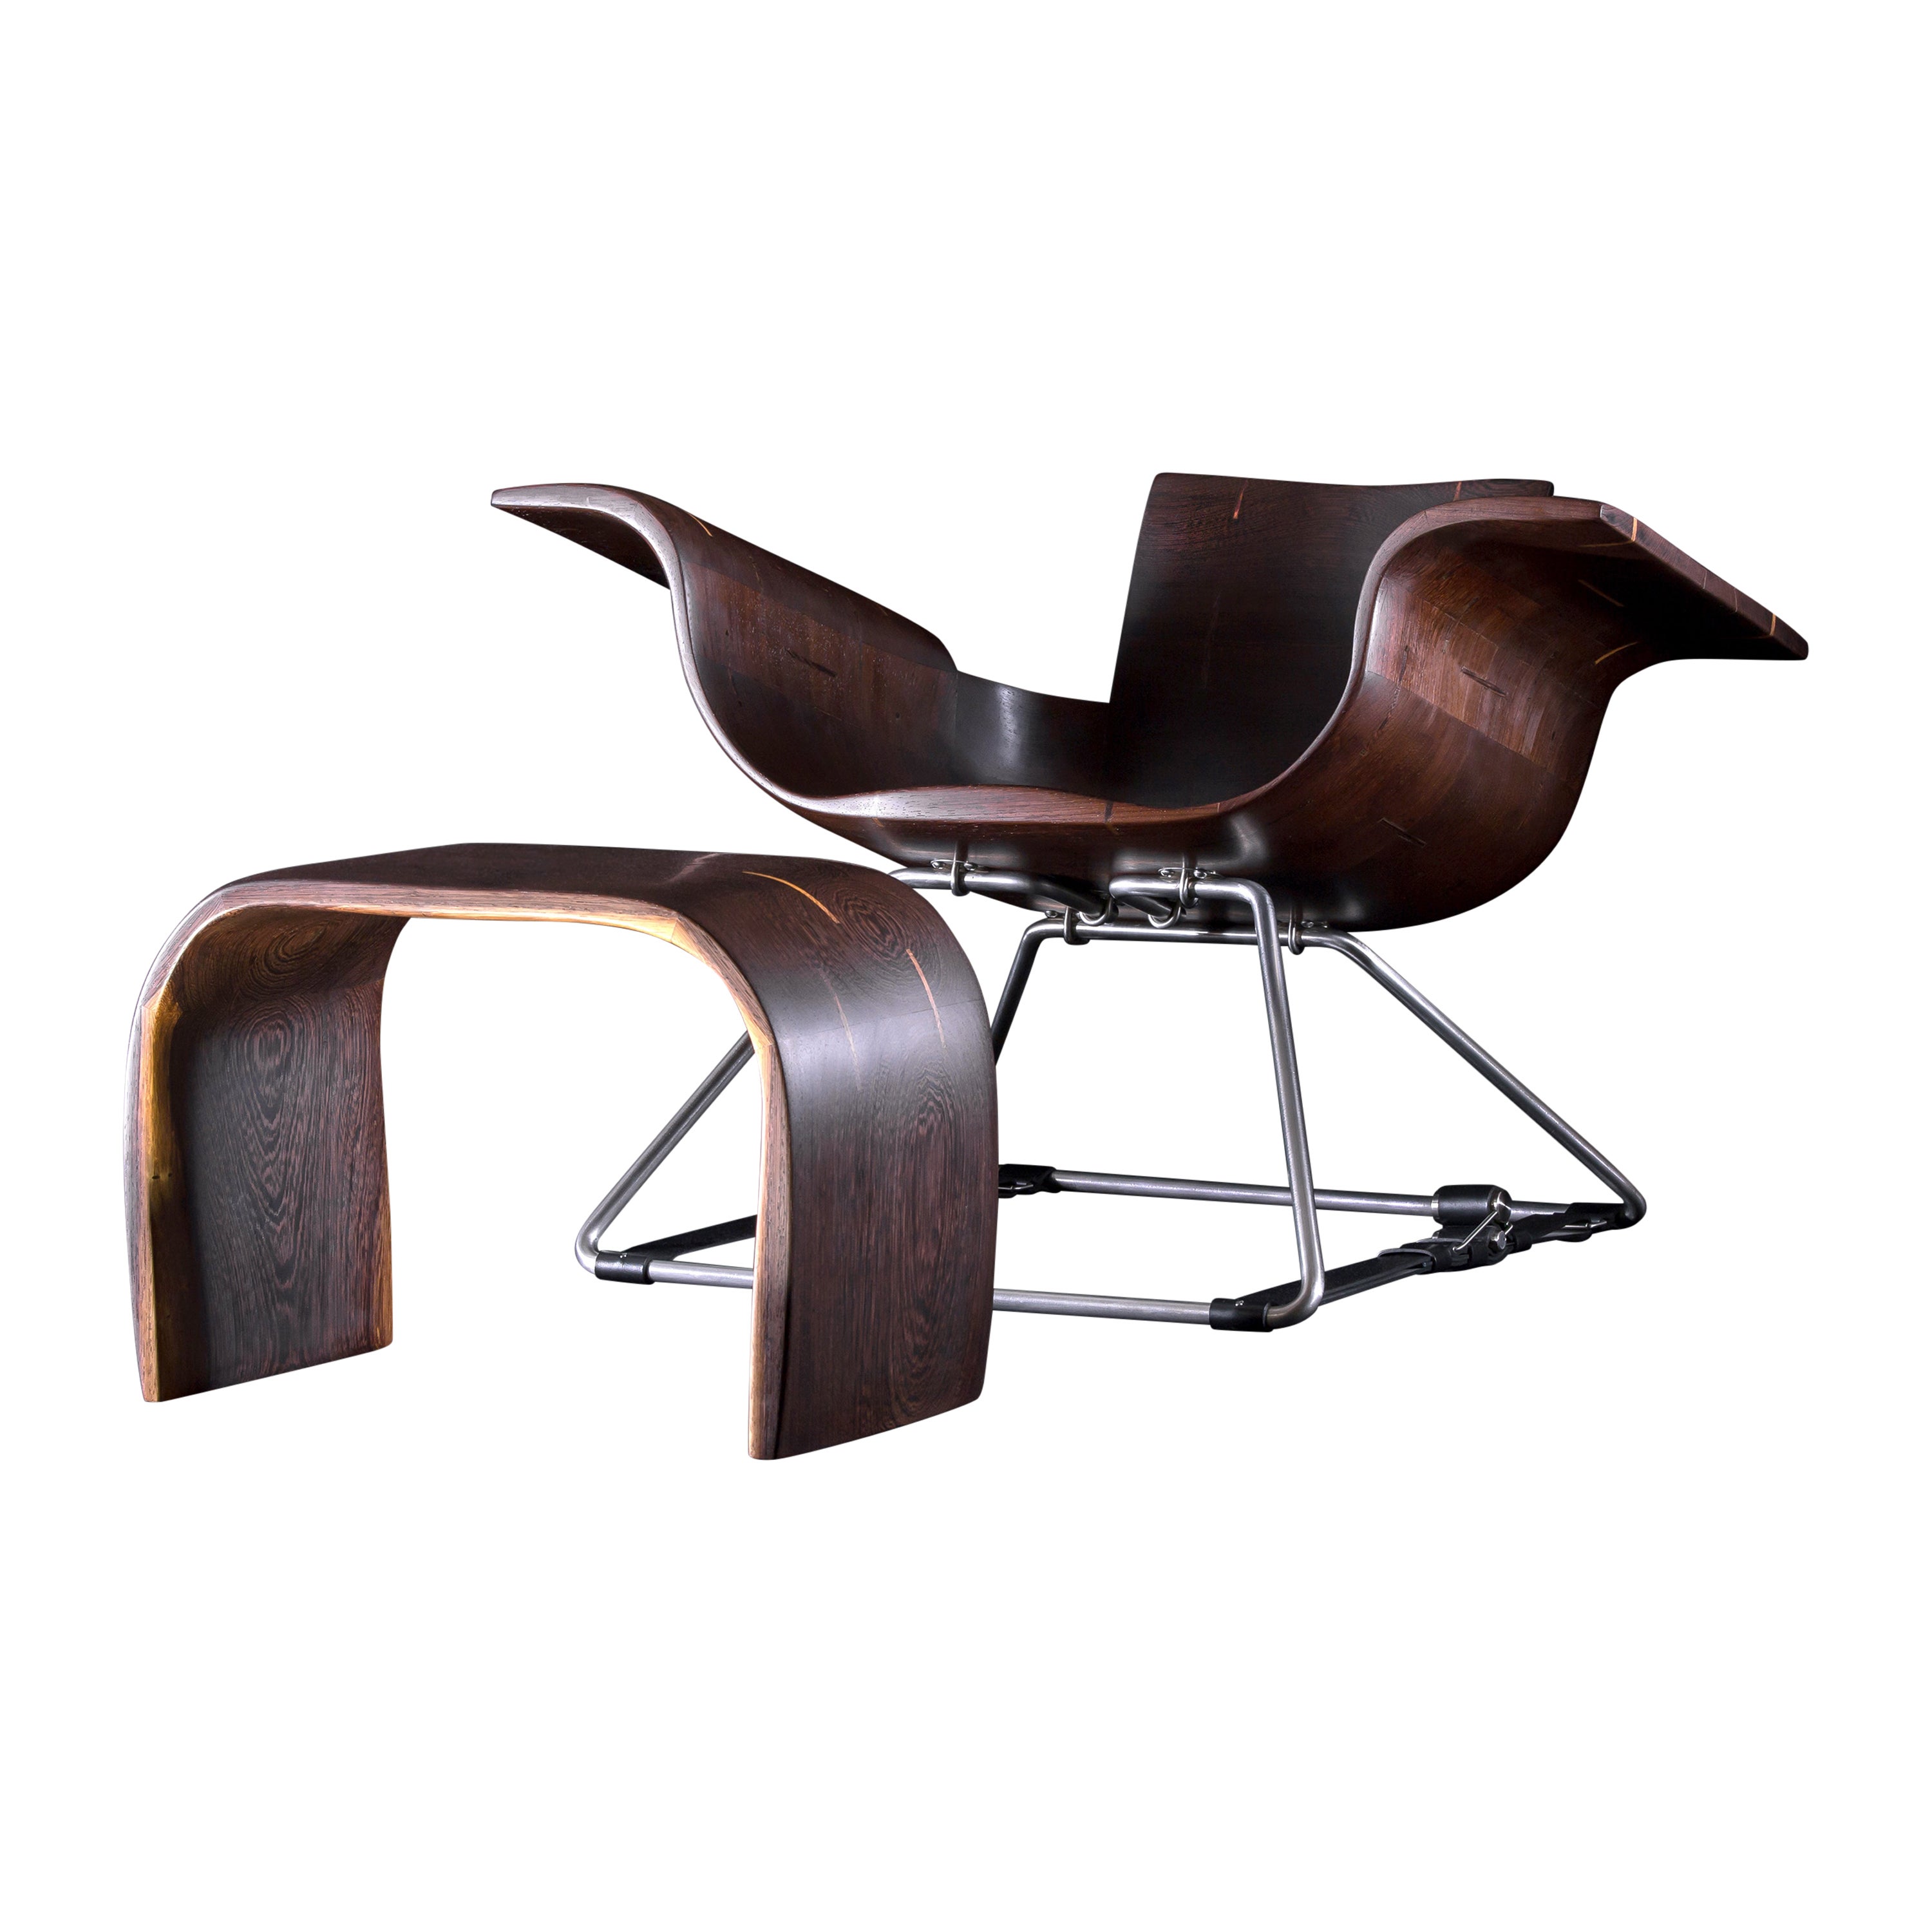 Roadster Armchair with Footstool made out of Wenge Wood. Handcrafted in Poland.